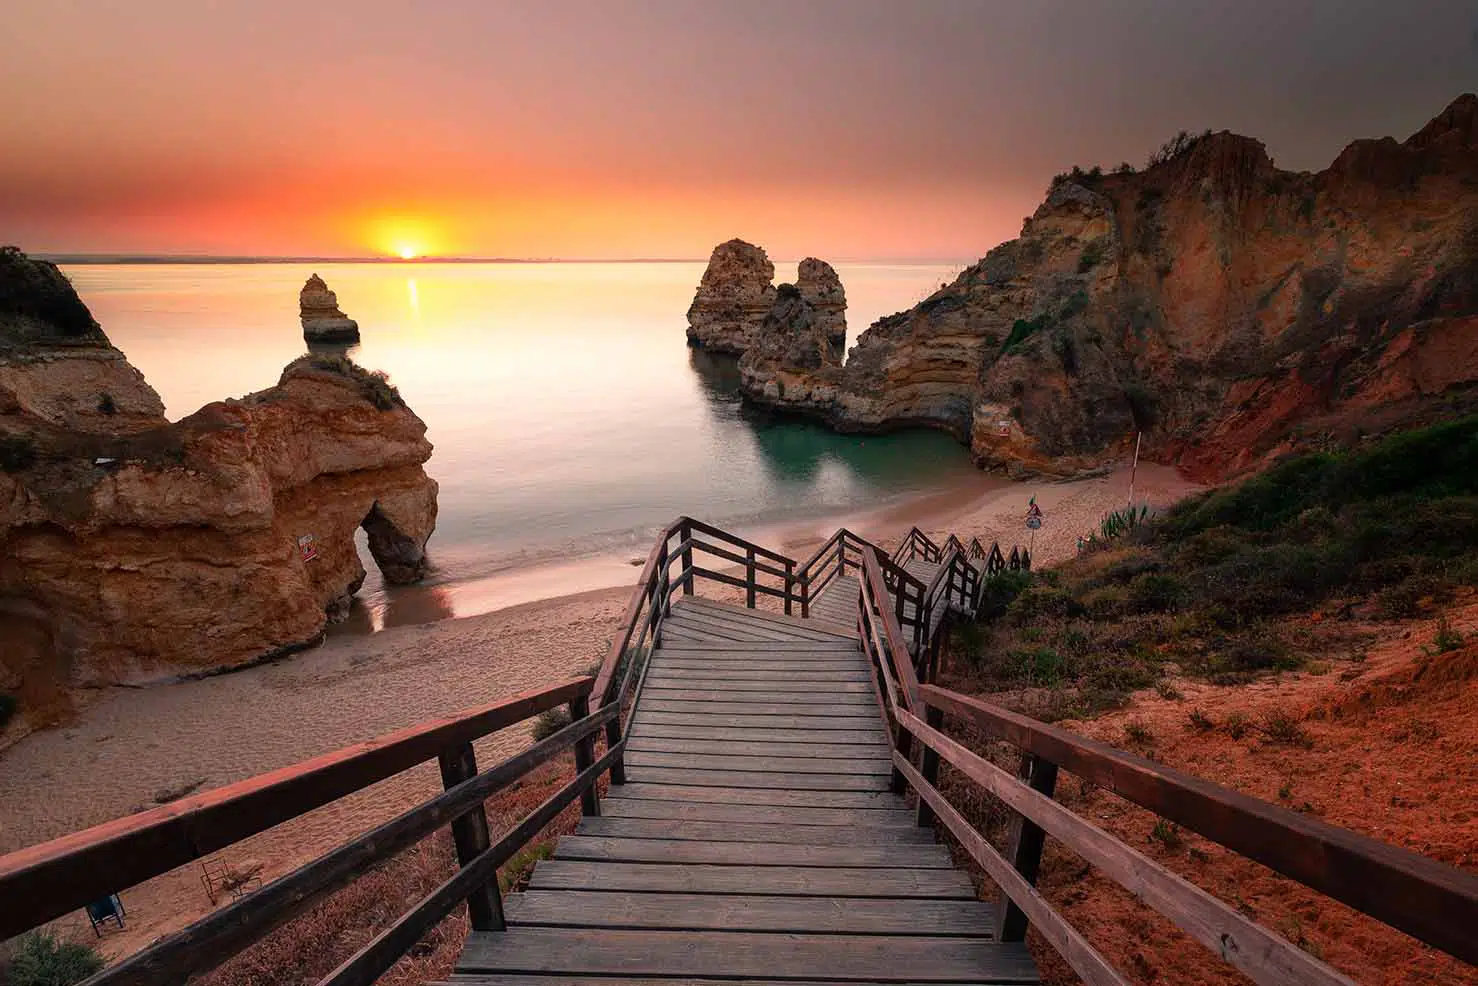 Coves And Cliffs At Ponta Da Piedade The Most Famous Spot Of Algarve Region In Portugal.jpg